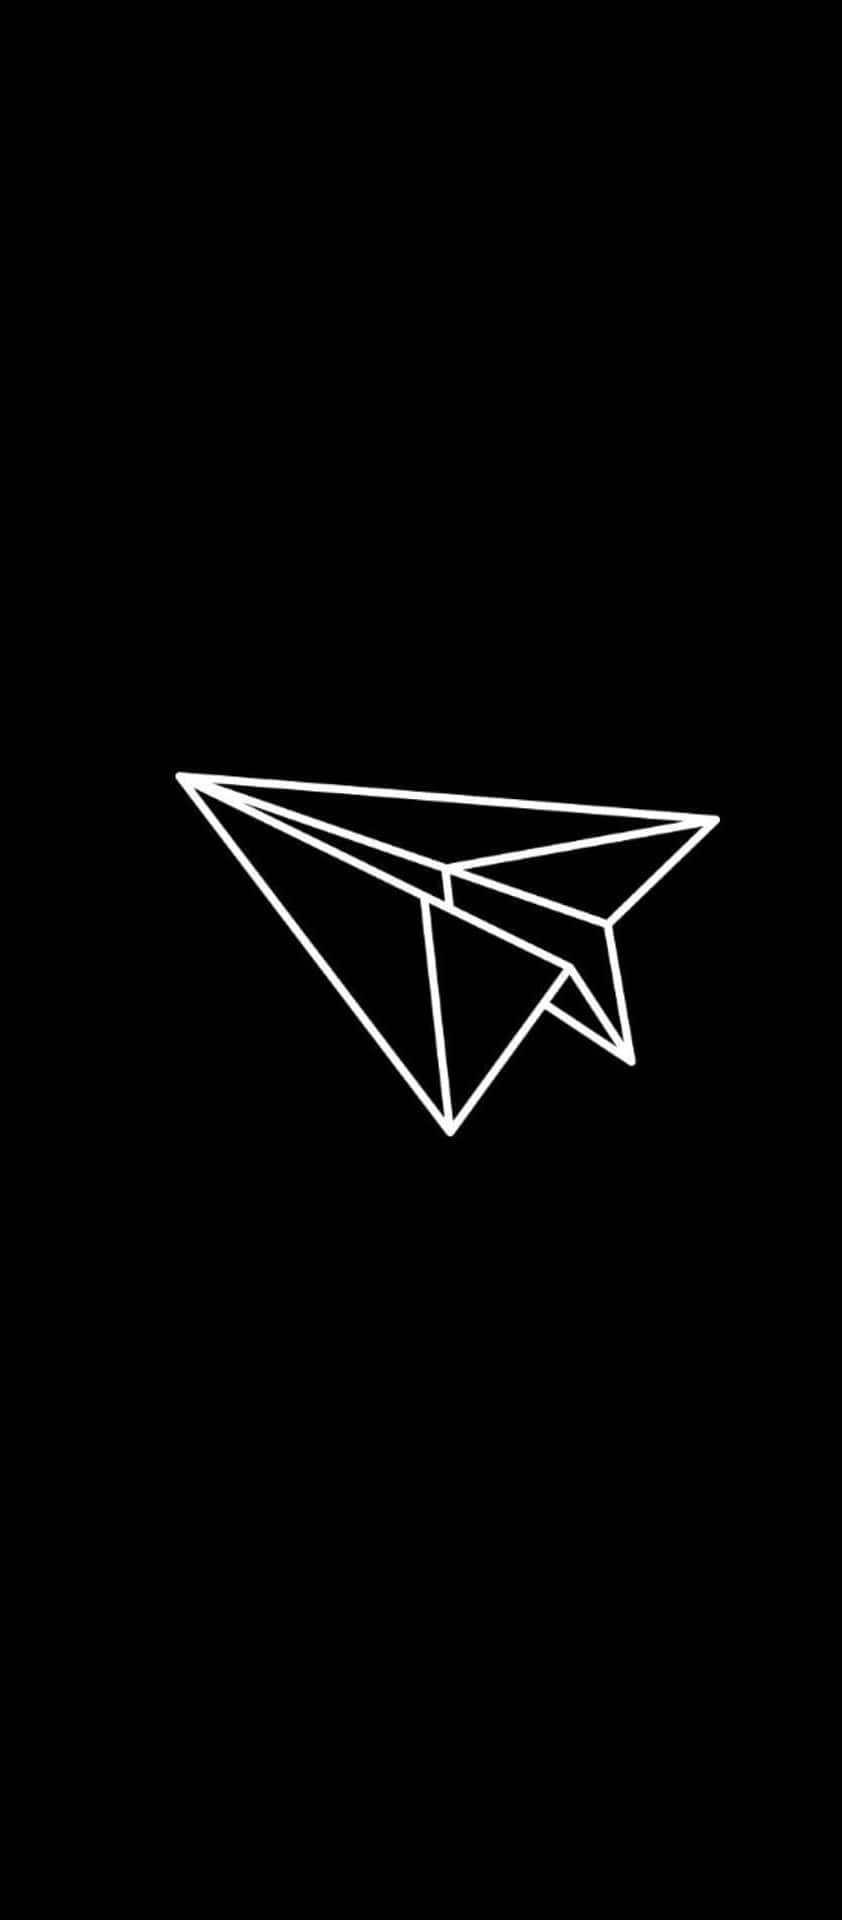 A Paper Airplane On A Black Background Wallpaper